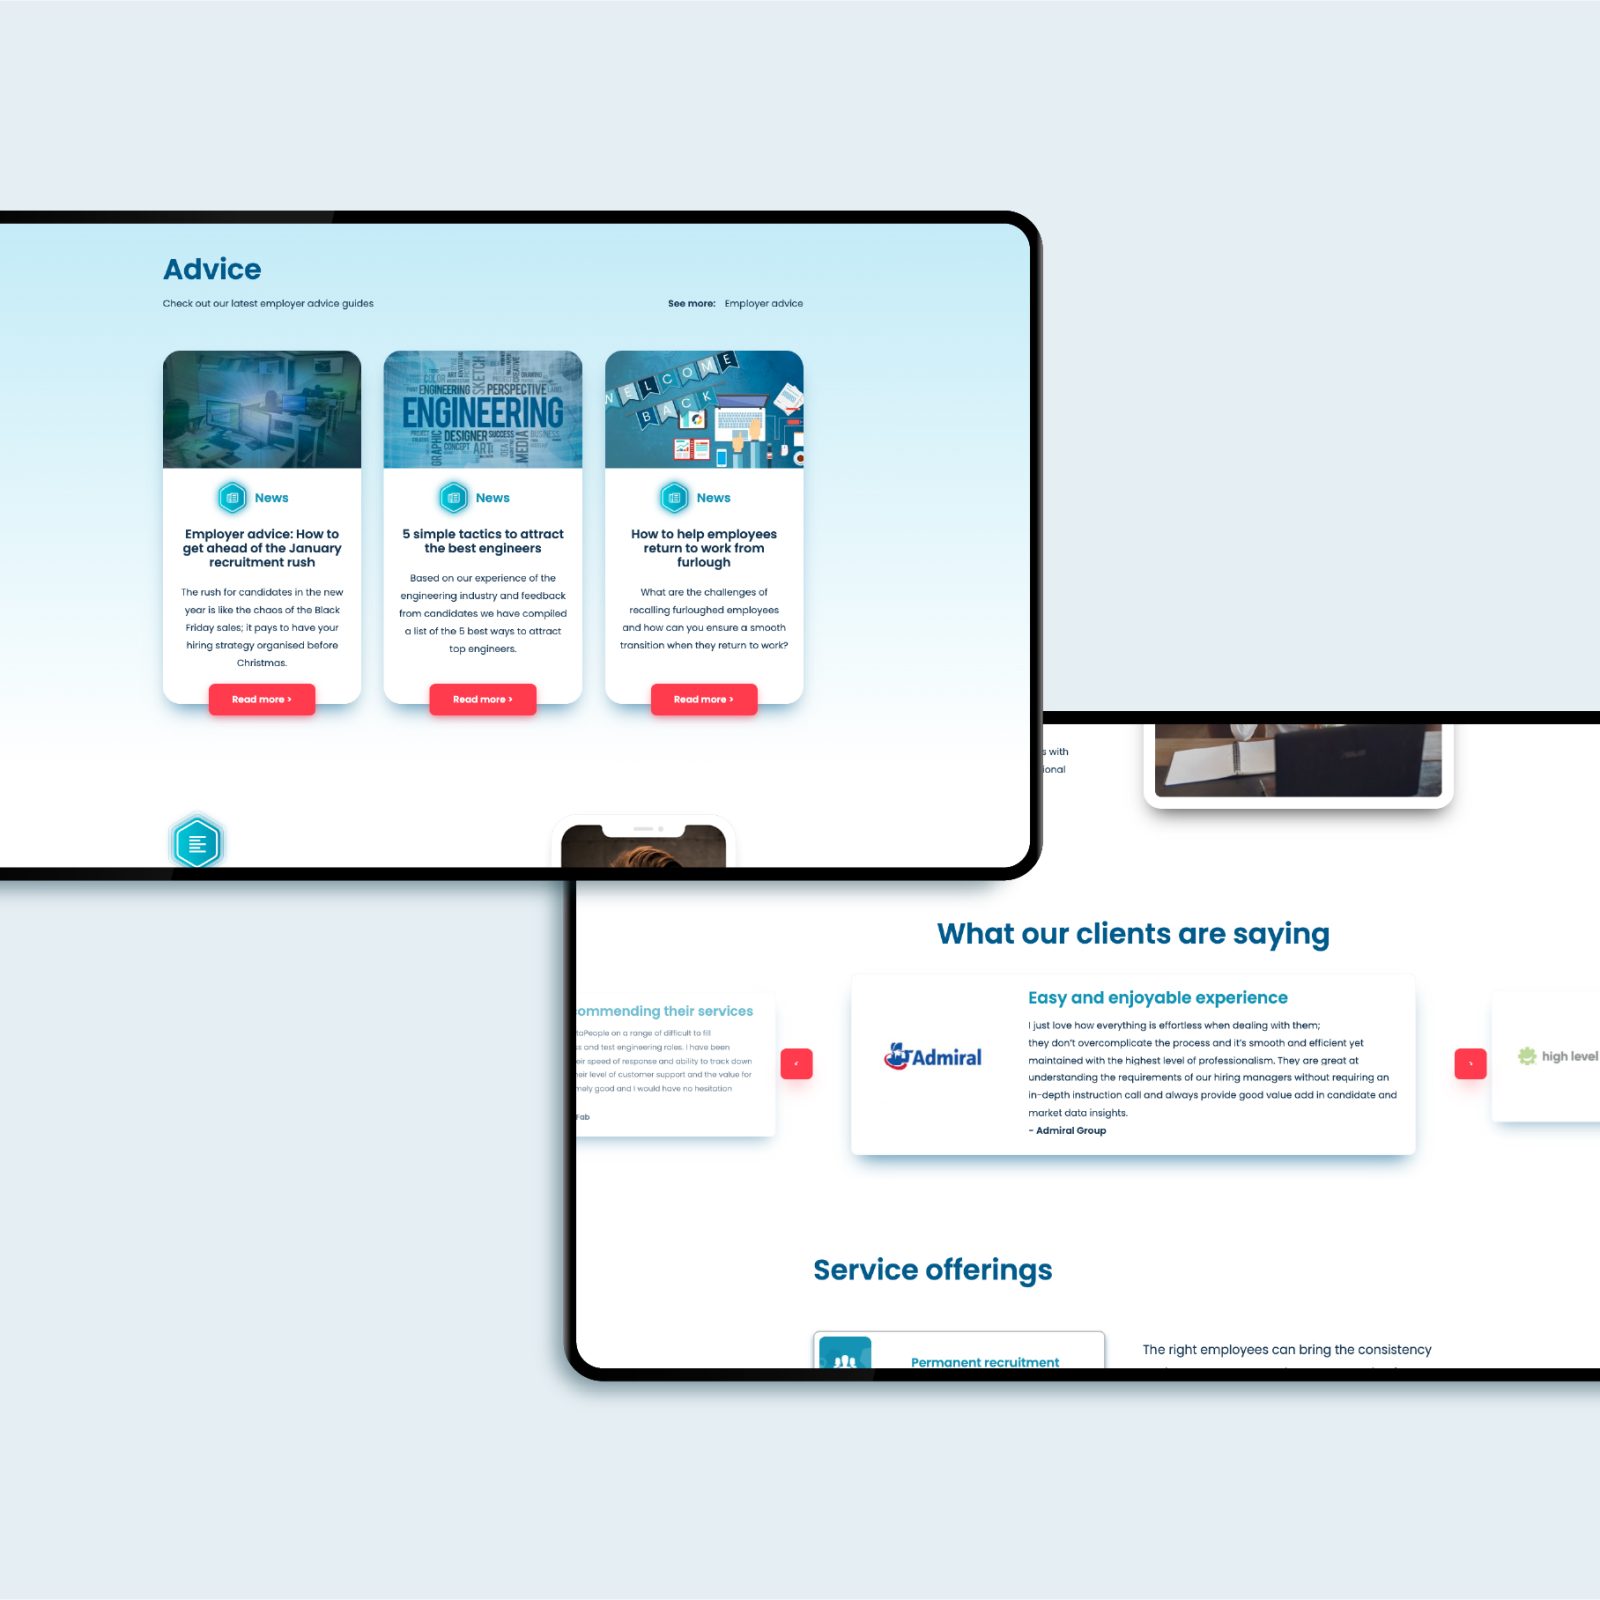 Three digital devices displaying sections of a professional website with text and images, focused on advice, engineering, and client testimonials for a Web Agency Bristol.